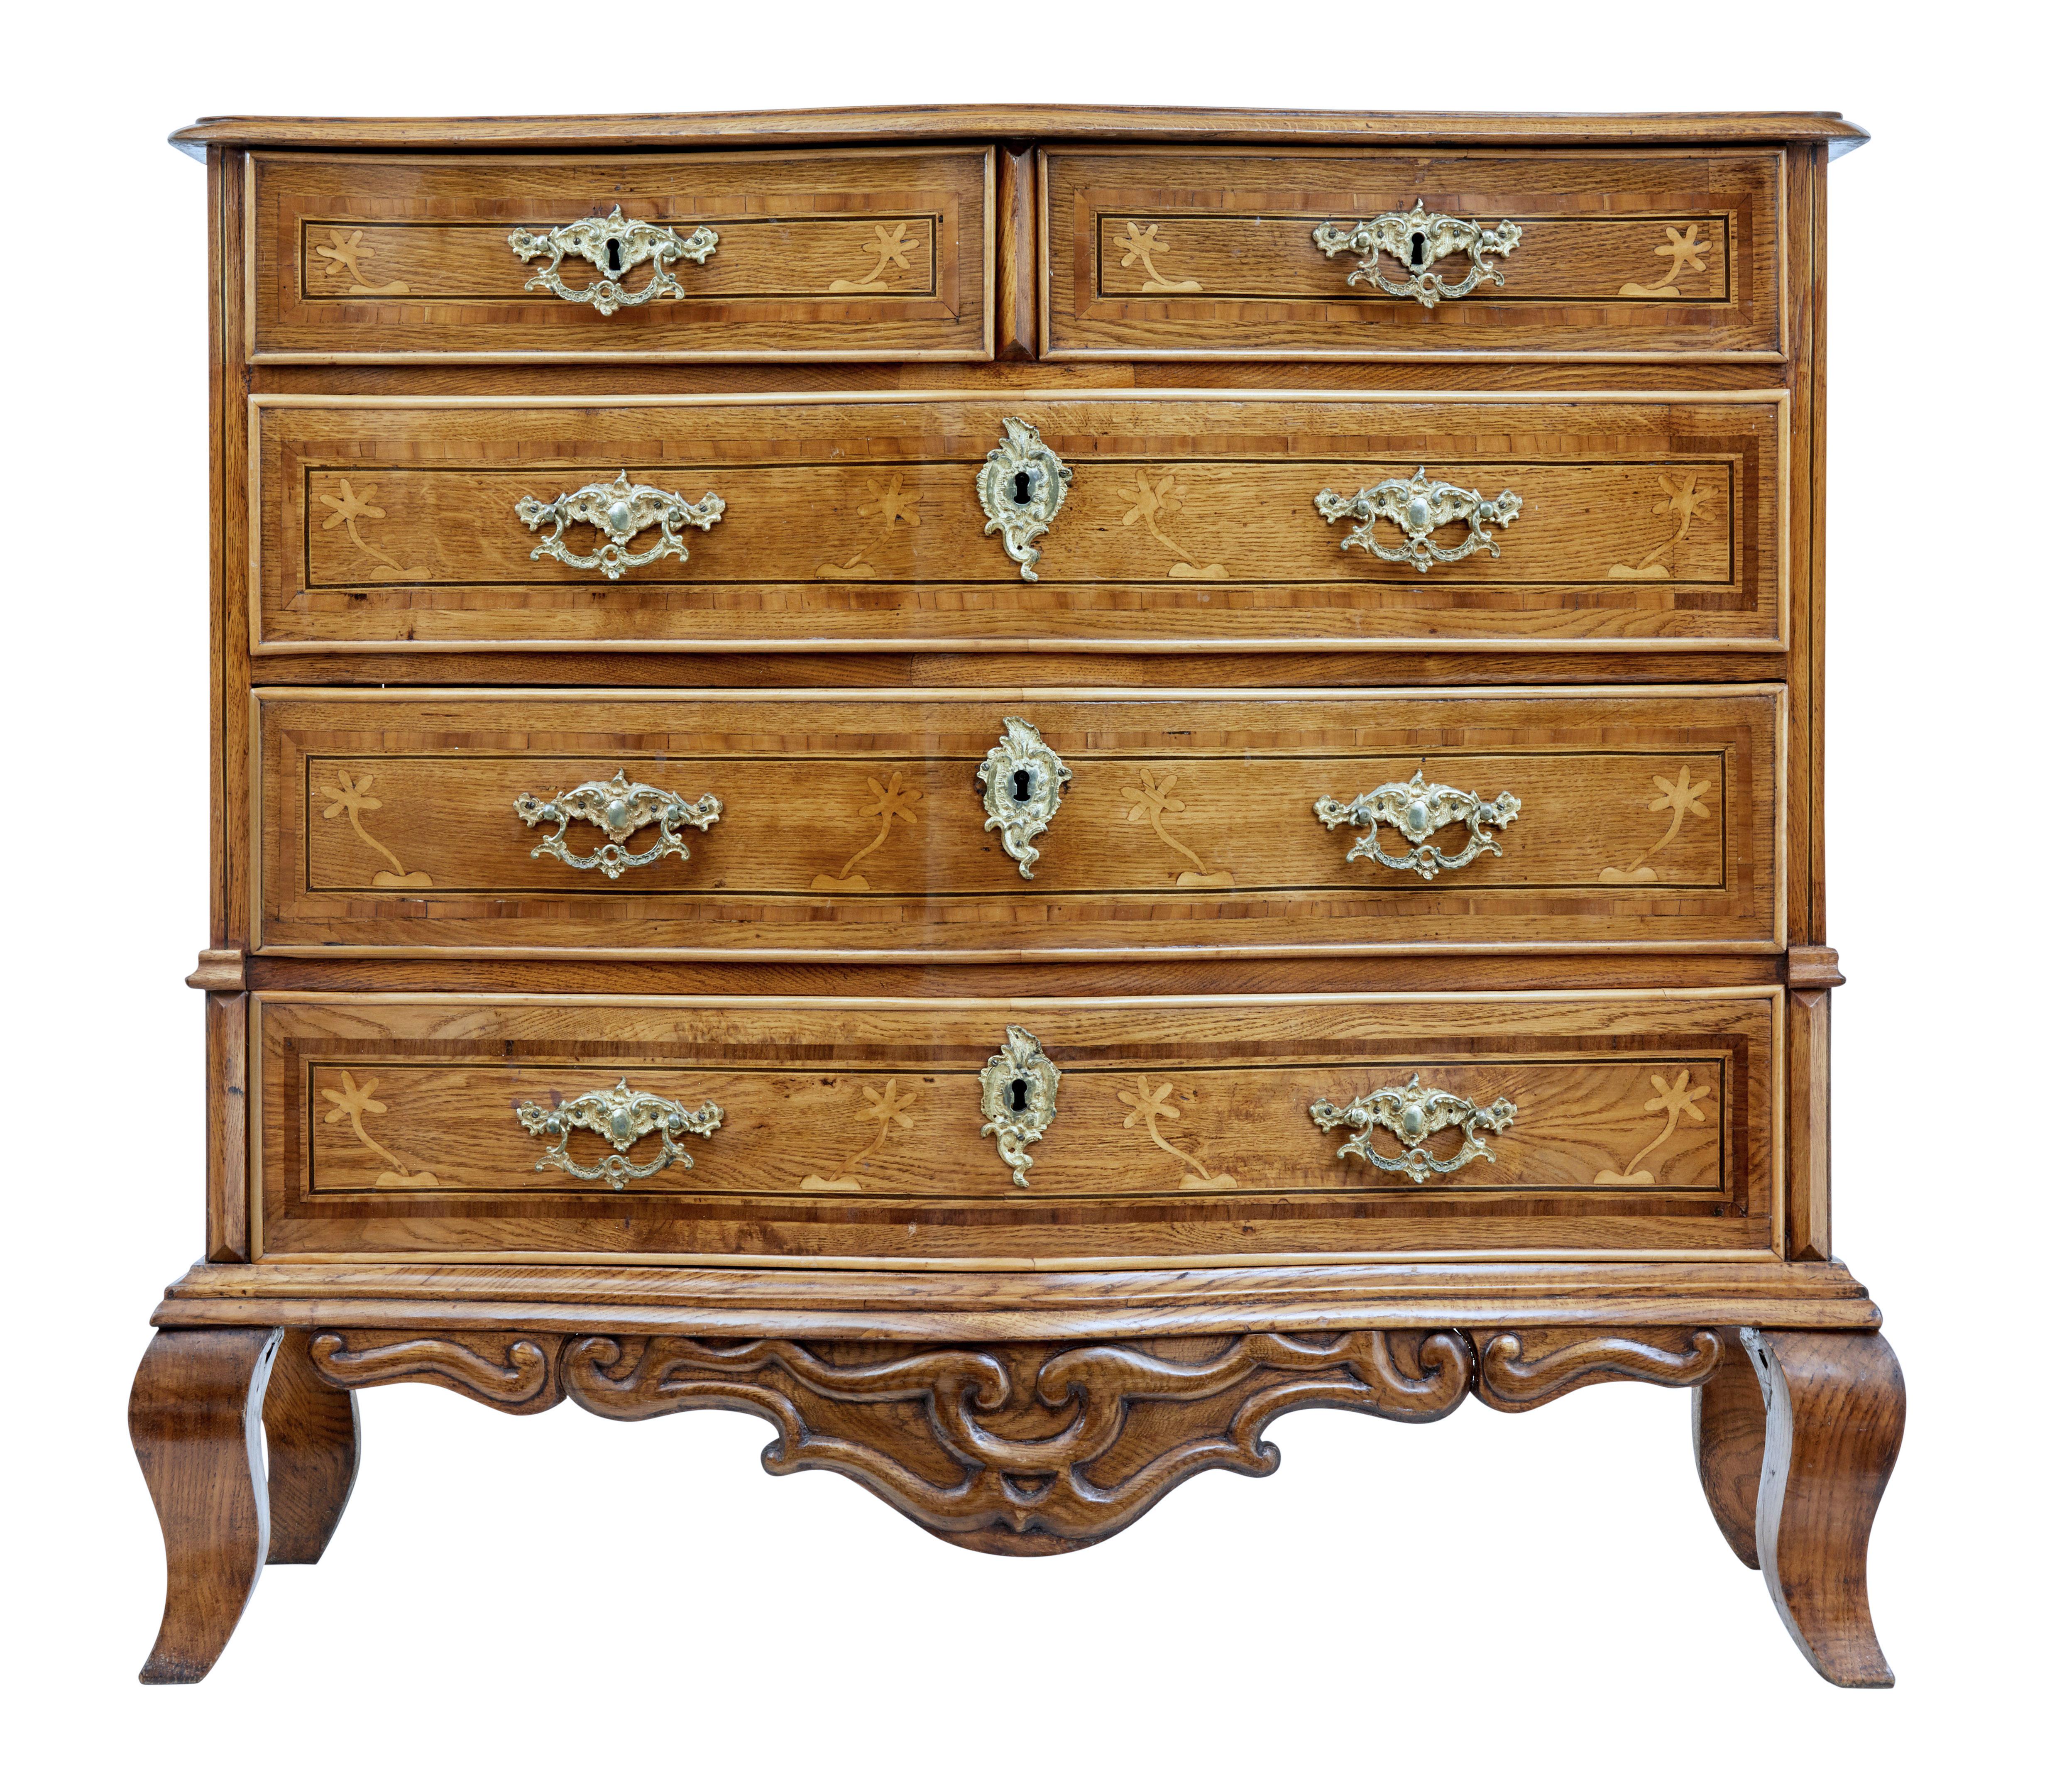 Early 19th century Swedish oak inlaid chest of drawers, circa 1800.

Rare Swedish period commode with a serpentine shaped front. Cock beaded drawer edges, inlaid with walnut and satinwood and ebony stringing

Inlaid birch design on the sides.